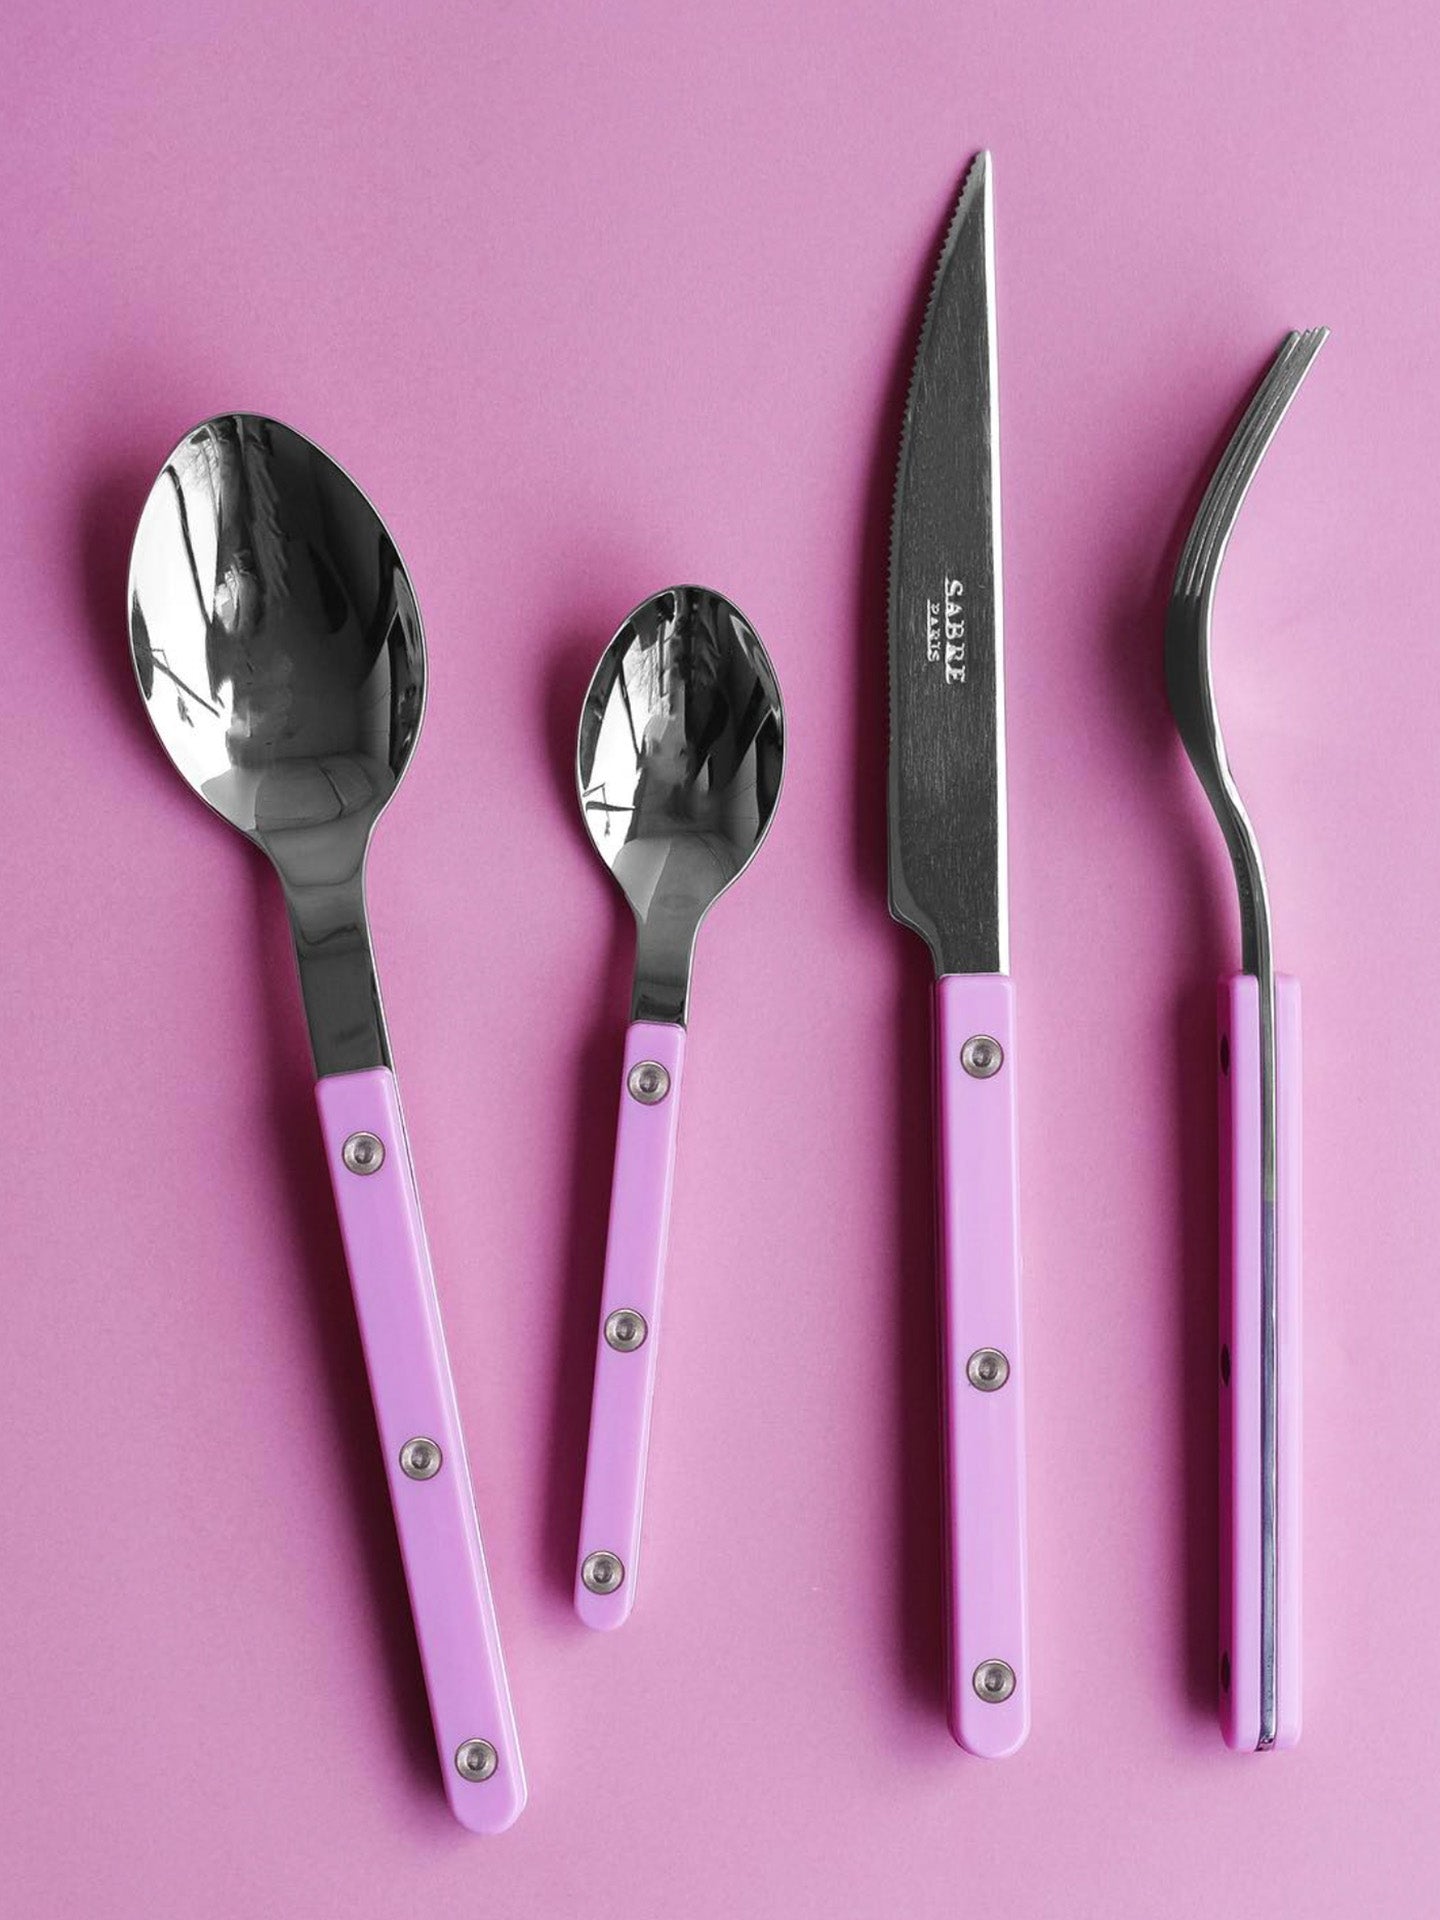 Sabre's little spoon is just 16 cm tall and machine washable. The Bistrot teaspoon couples great with the tablespoon, dinner fork and the dinner knife of the same colour. But it's possible to mix them with other shades, too, as the cutleries are available to buy in single pieces - pink will look fabulous with garden greens, red, or ivory cutleries!